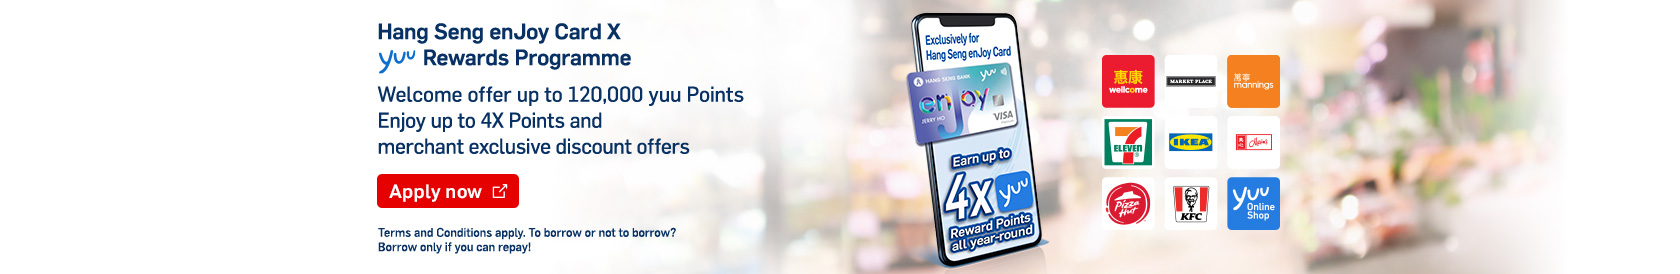 Apply now, Hang Seng enJoy Card x yuu Rewards Programme – Welcome Offer up to 120,000 yuu Points, Enjoy up to 4X Points and merchant exclusive discount offers